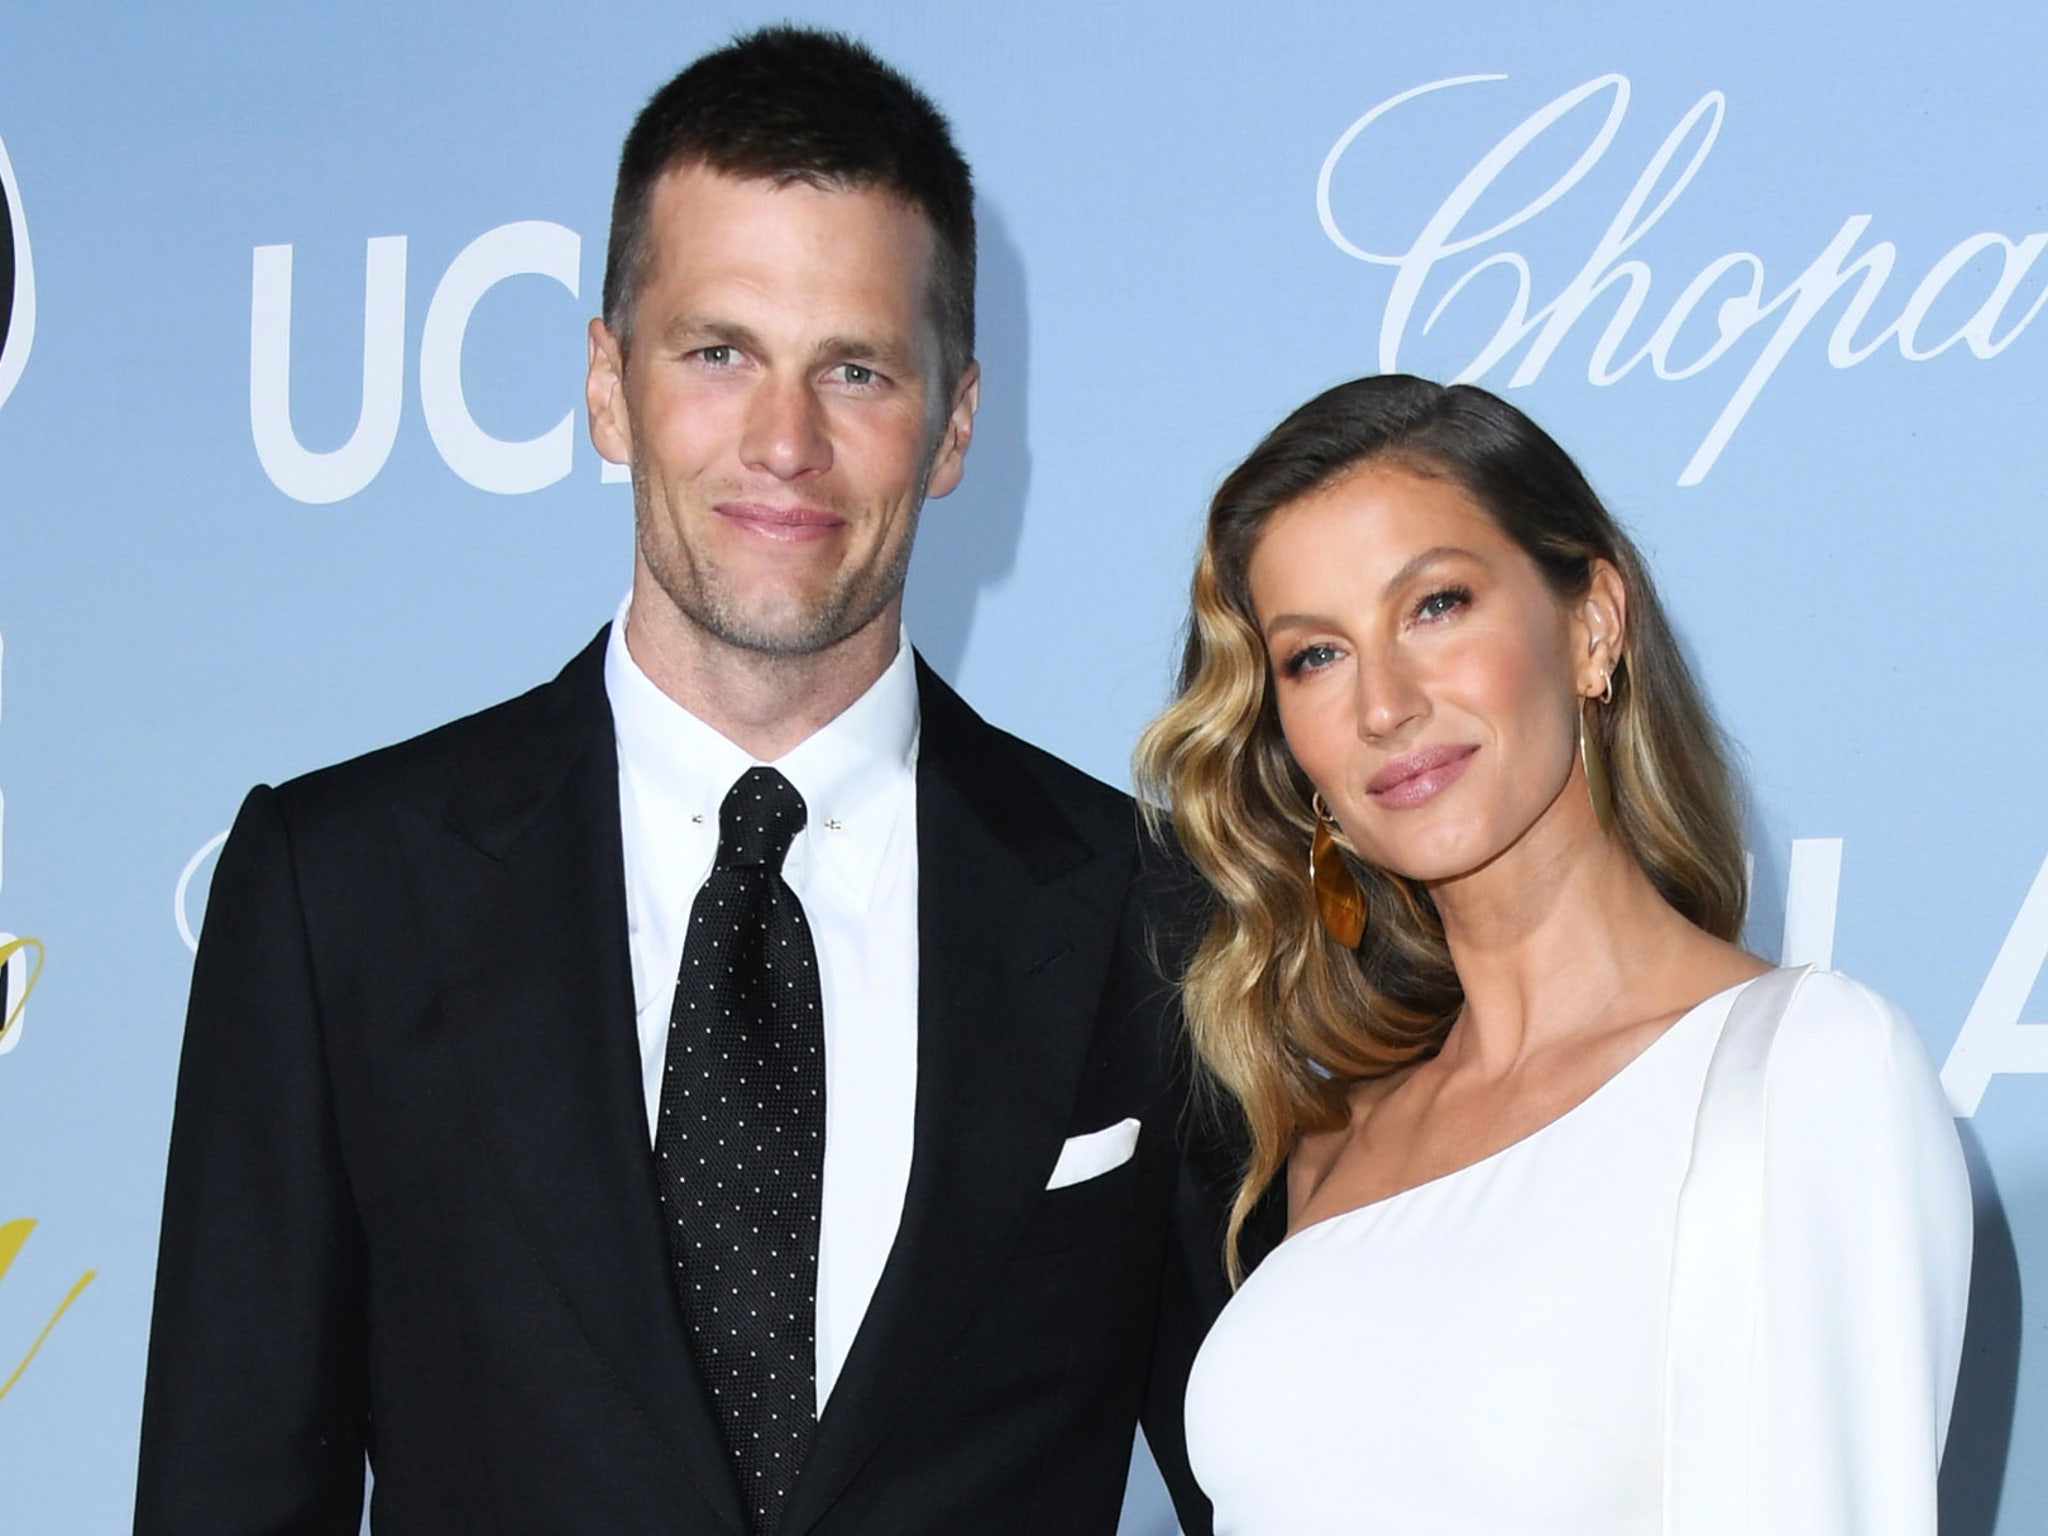 Tom Brady Dishes on Pre-Game Sex with Gisele Bundchen pic